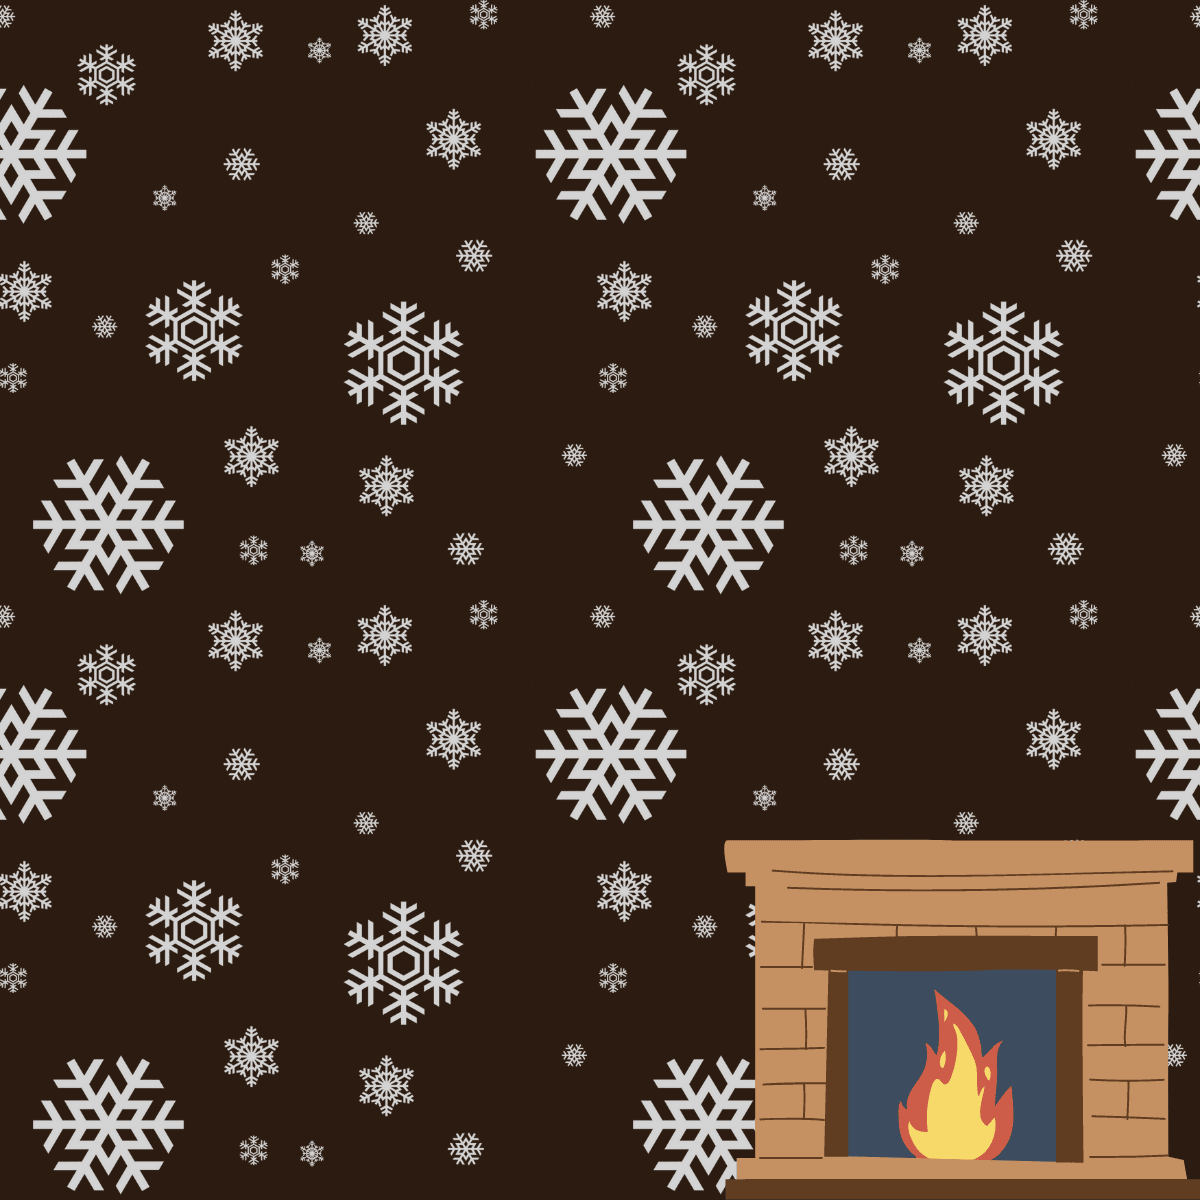 Fireplace in snowfall